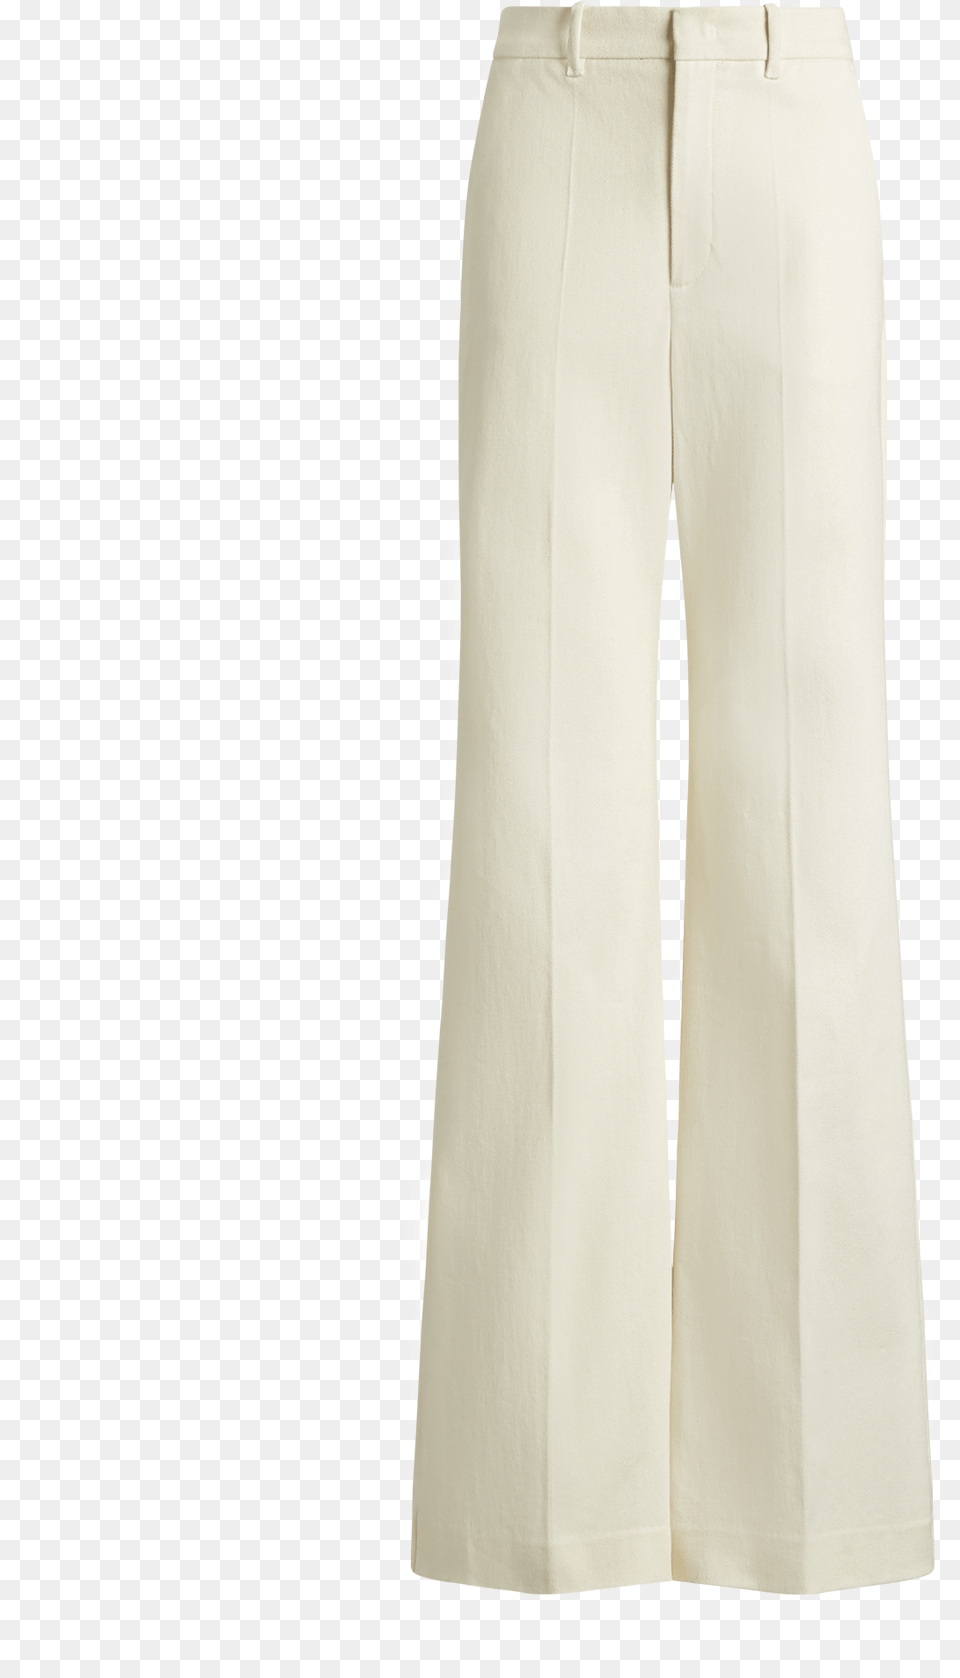 Joseph Jess Drill Stretch Trousers In Ecru Skirt, Clothing, Home Decor, Linen, Pants Png